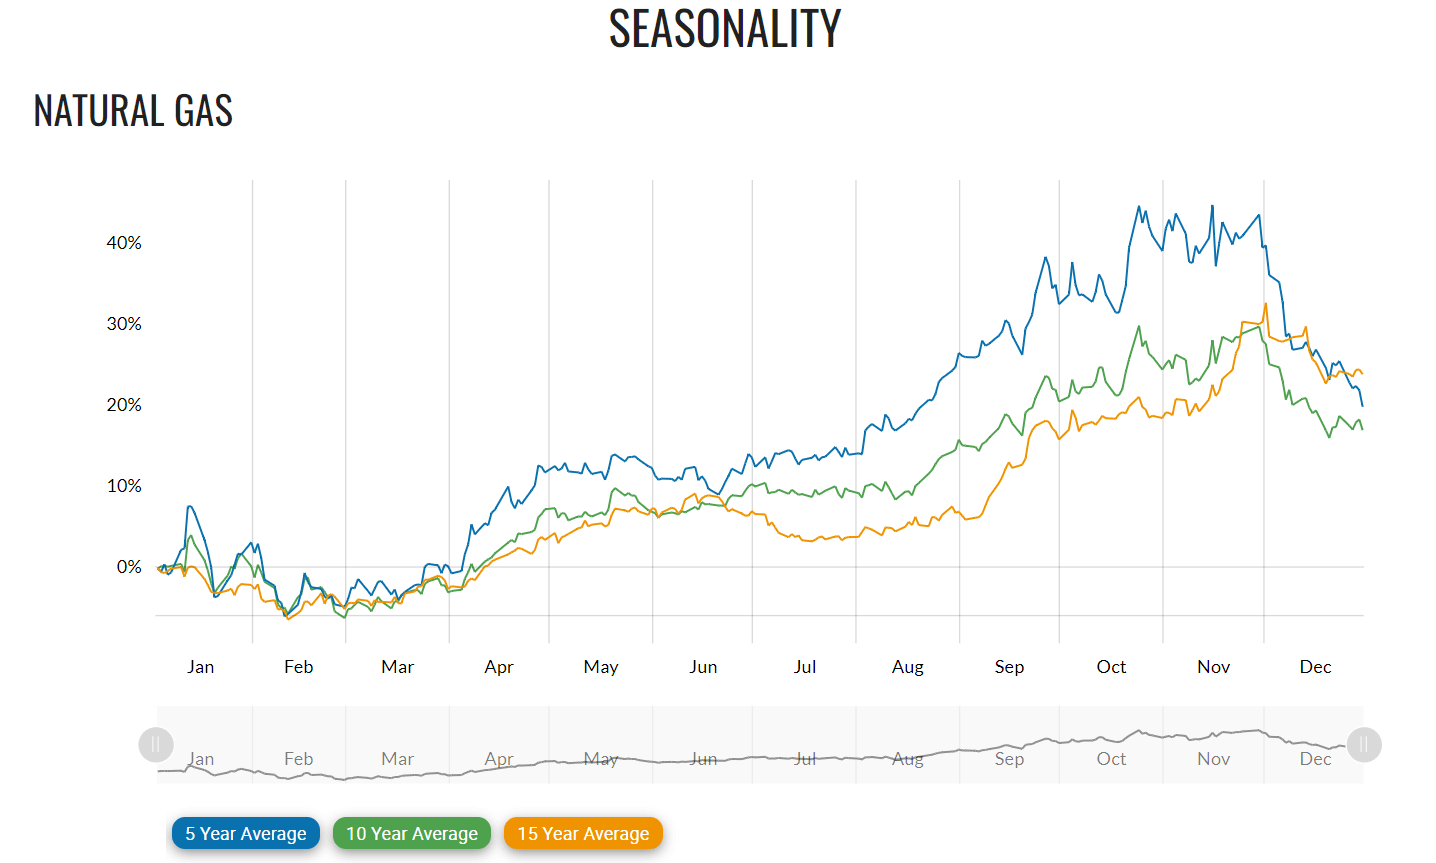 The seasonal price trend of natural gas in 5-, 10-, and 15-year averages Chart